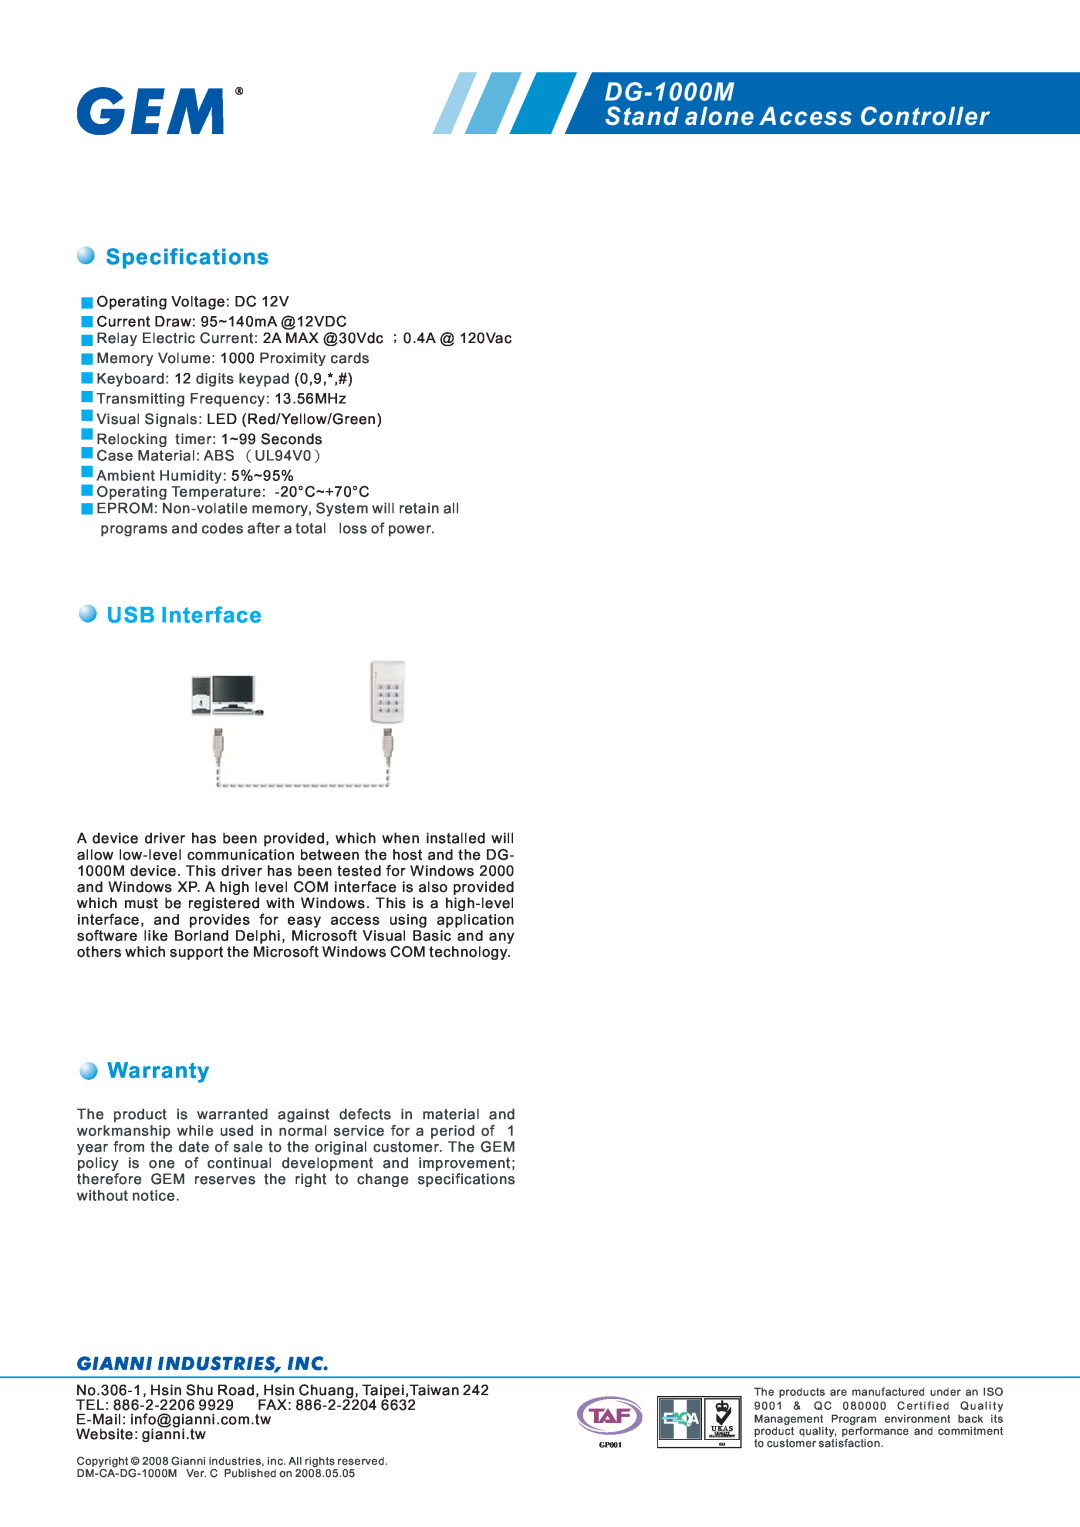 Gianni Industries manual Specifications, USB Interface, Warranty, DG-1000M Stand alone Access Controller 